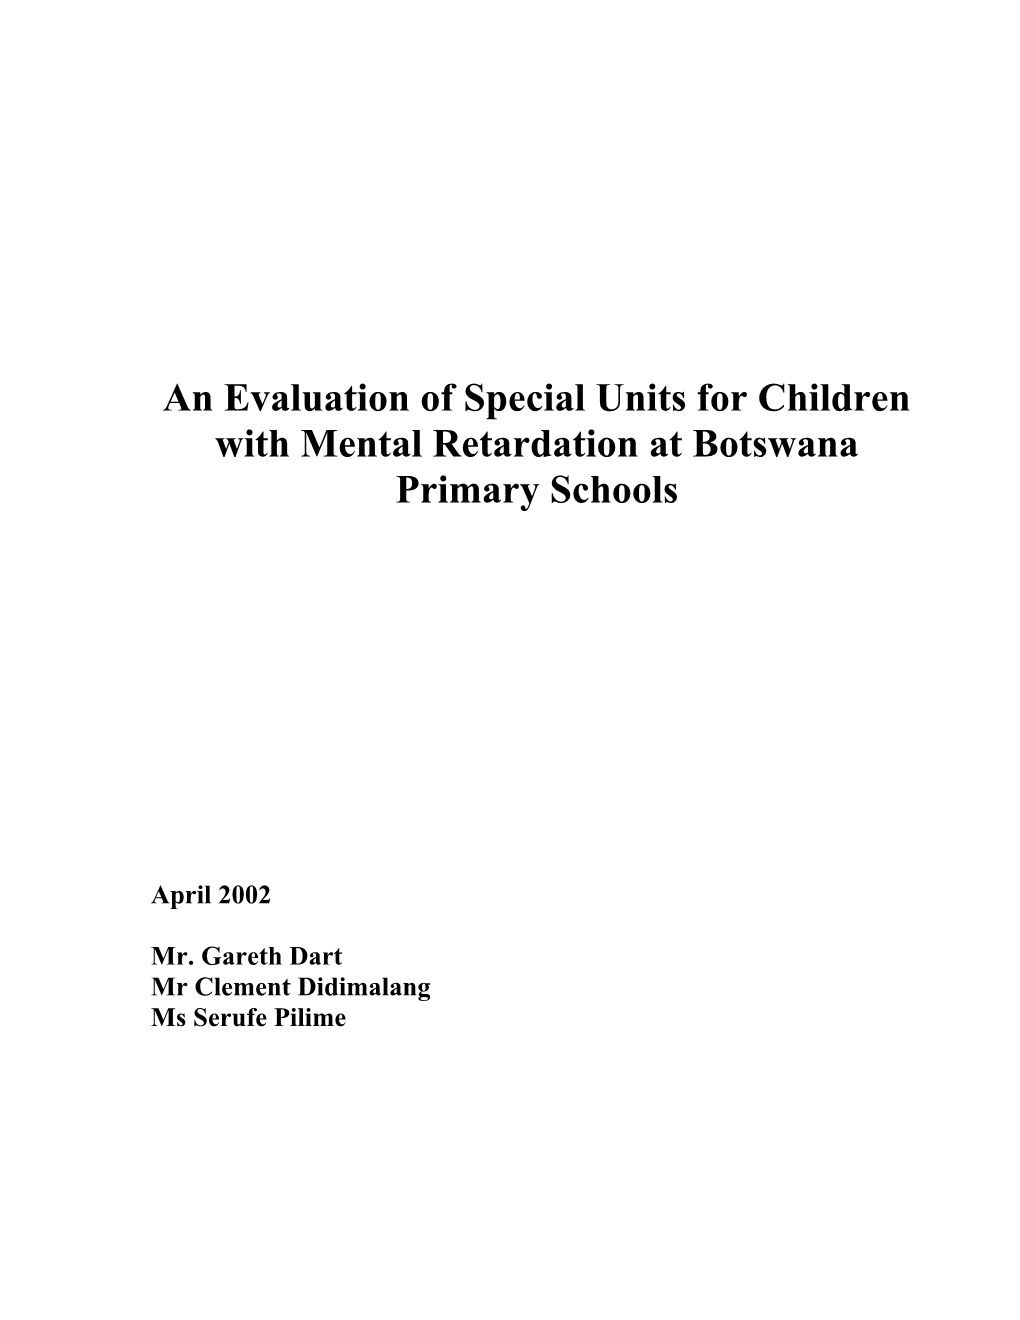 An Evaluation Of Special Units For Children With Mental Retardation At Botswana Primary Schools